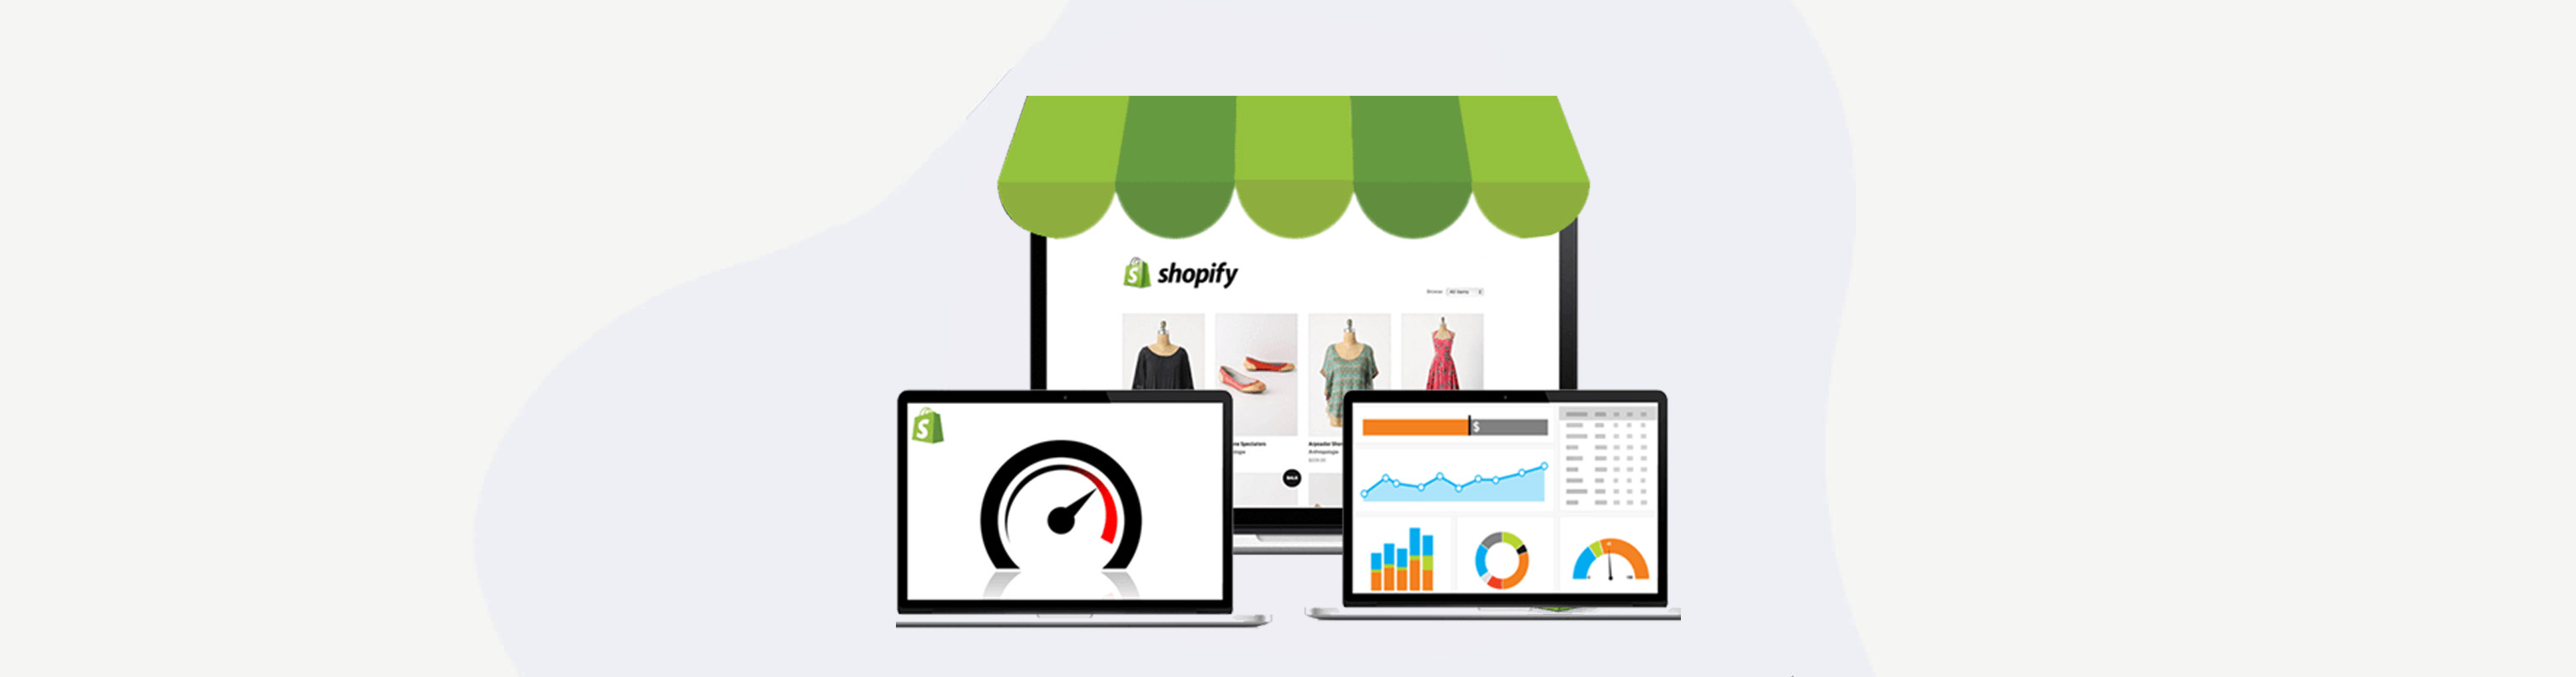 Best Practices For Your Shopify Store UX